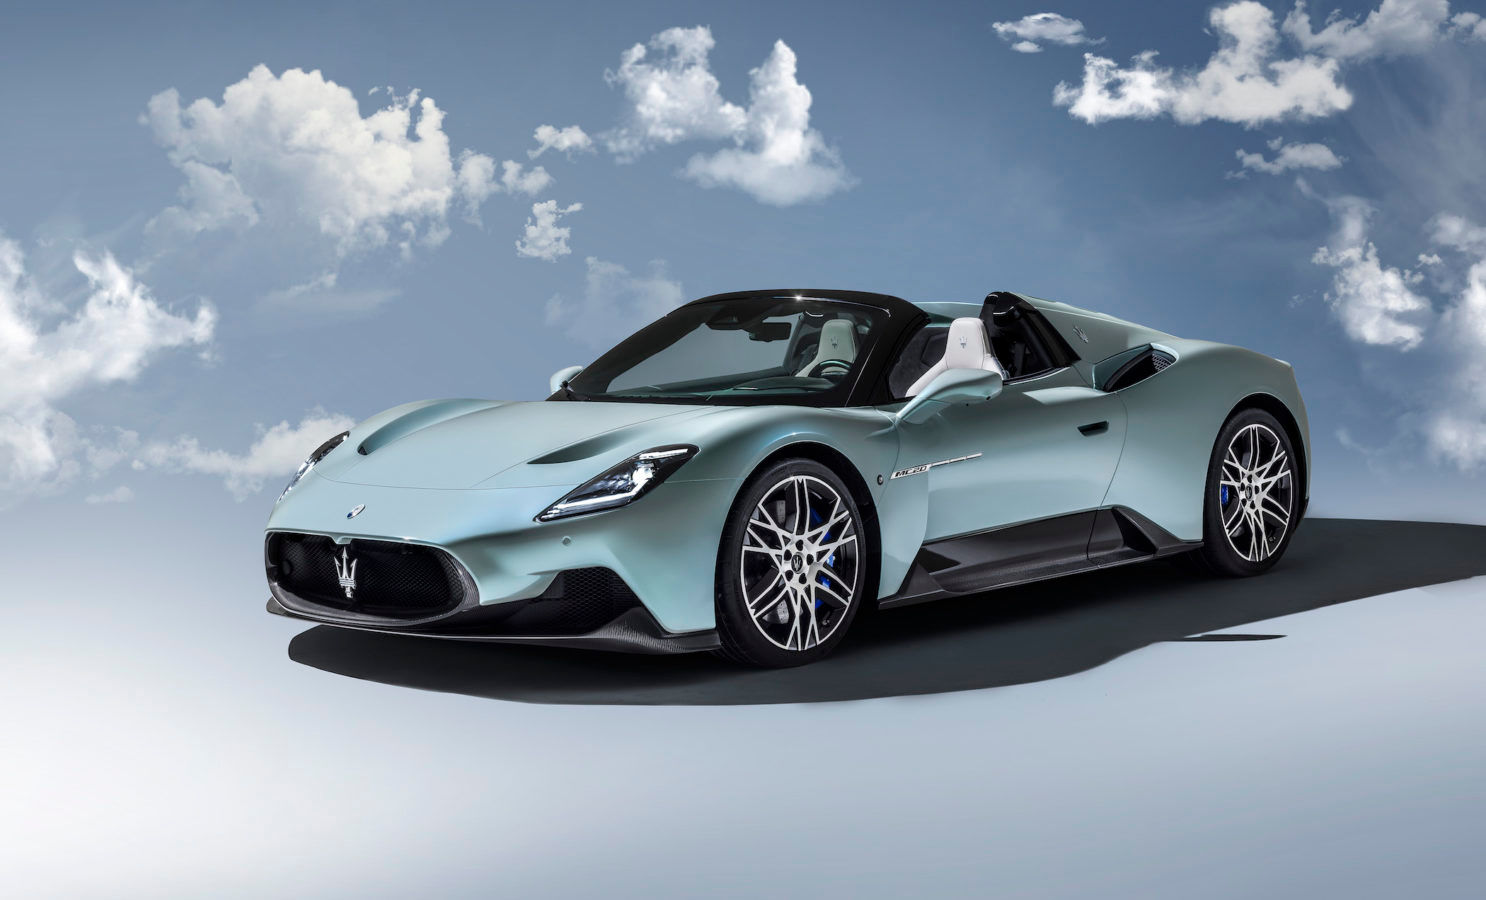 The new Maserati MC20 Cielo is a spyder you’ll want to be seen in